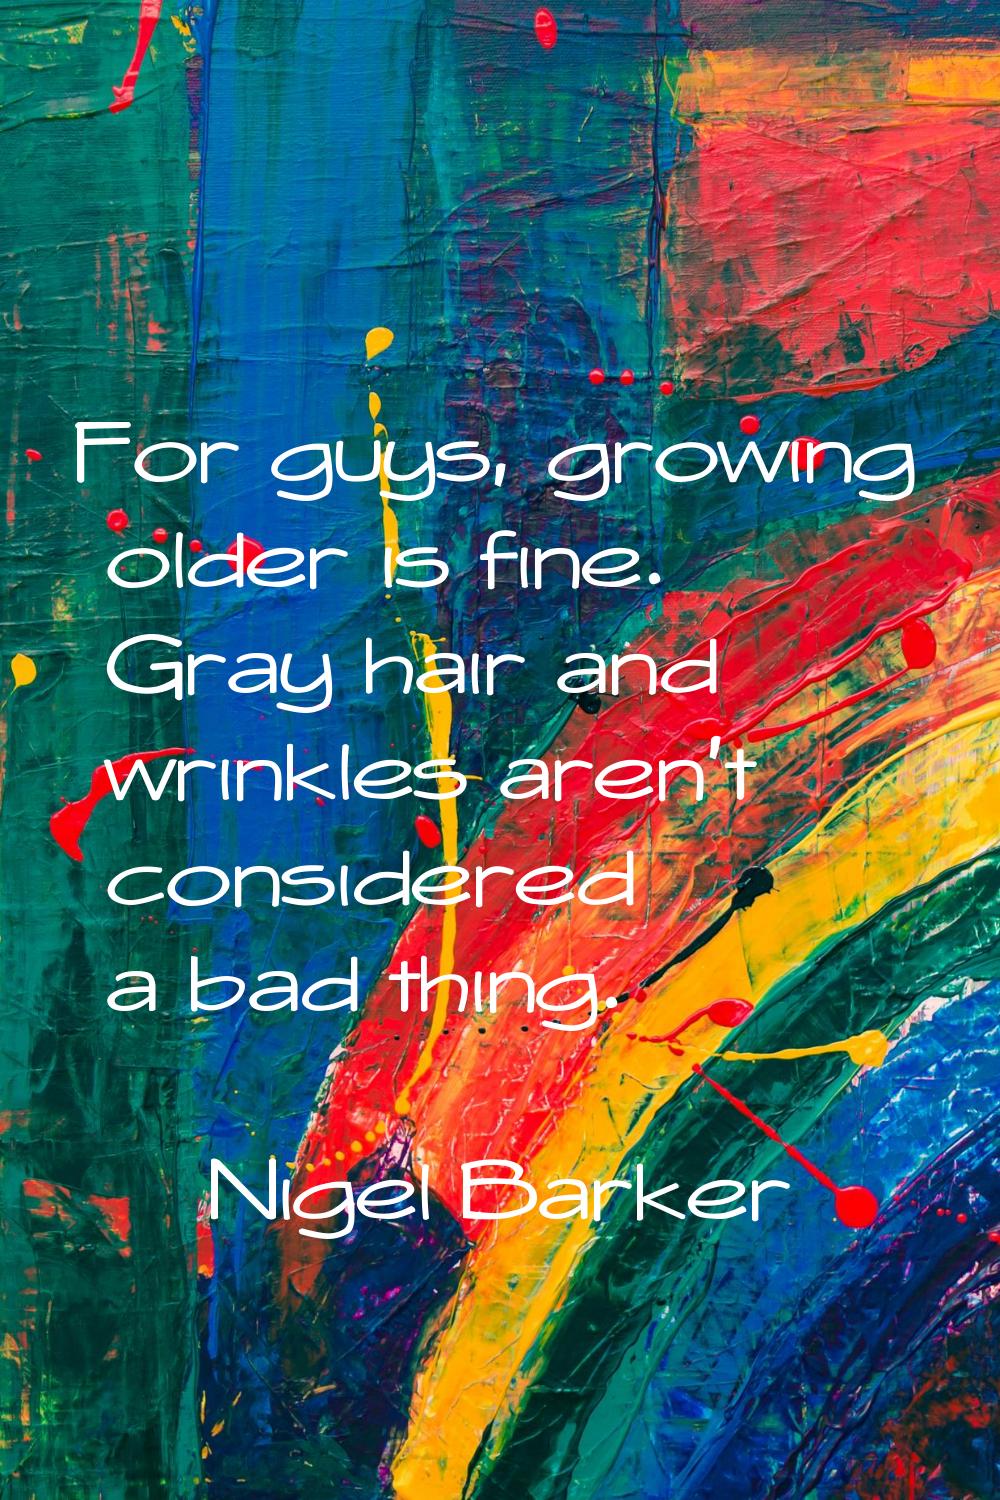 For guys, growing older is fine. Gray hair and wrinkles aren't considered a bad thing.